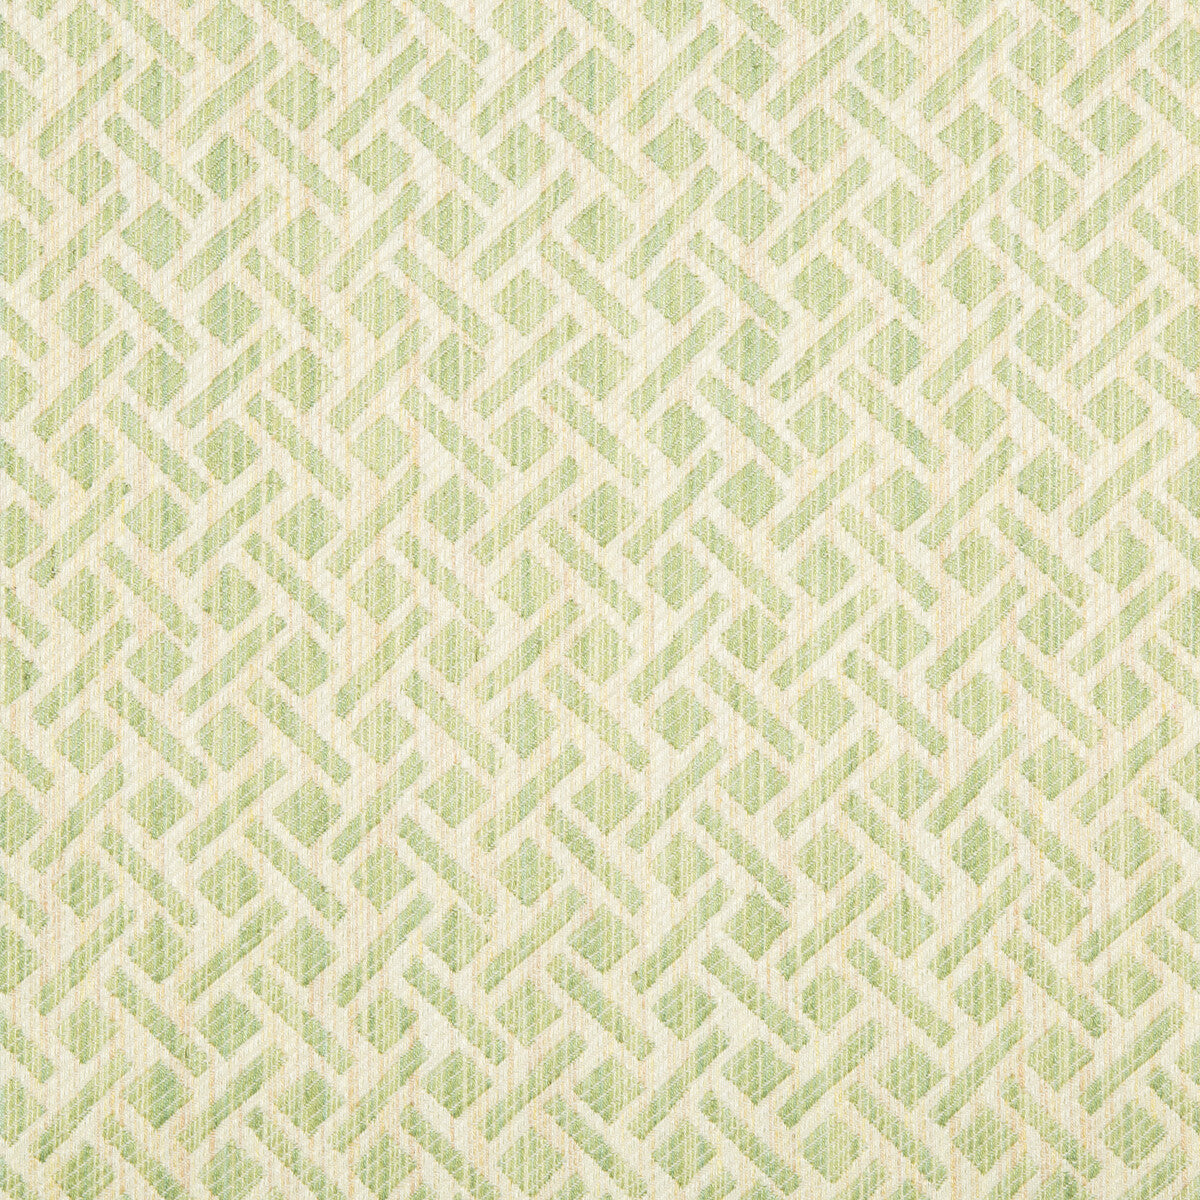 Comte Strie fabric in celery color - pattern 8017141.3.0 - by Brunschwig &amp; Fils in the Baronet collection